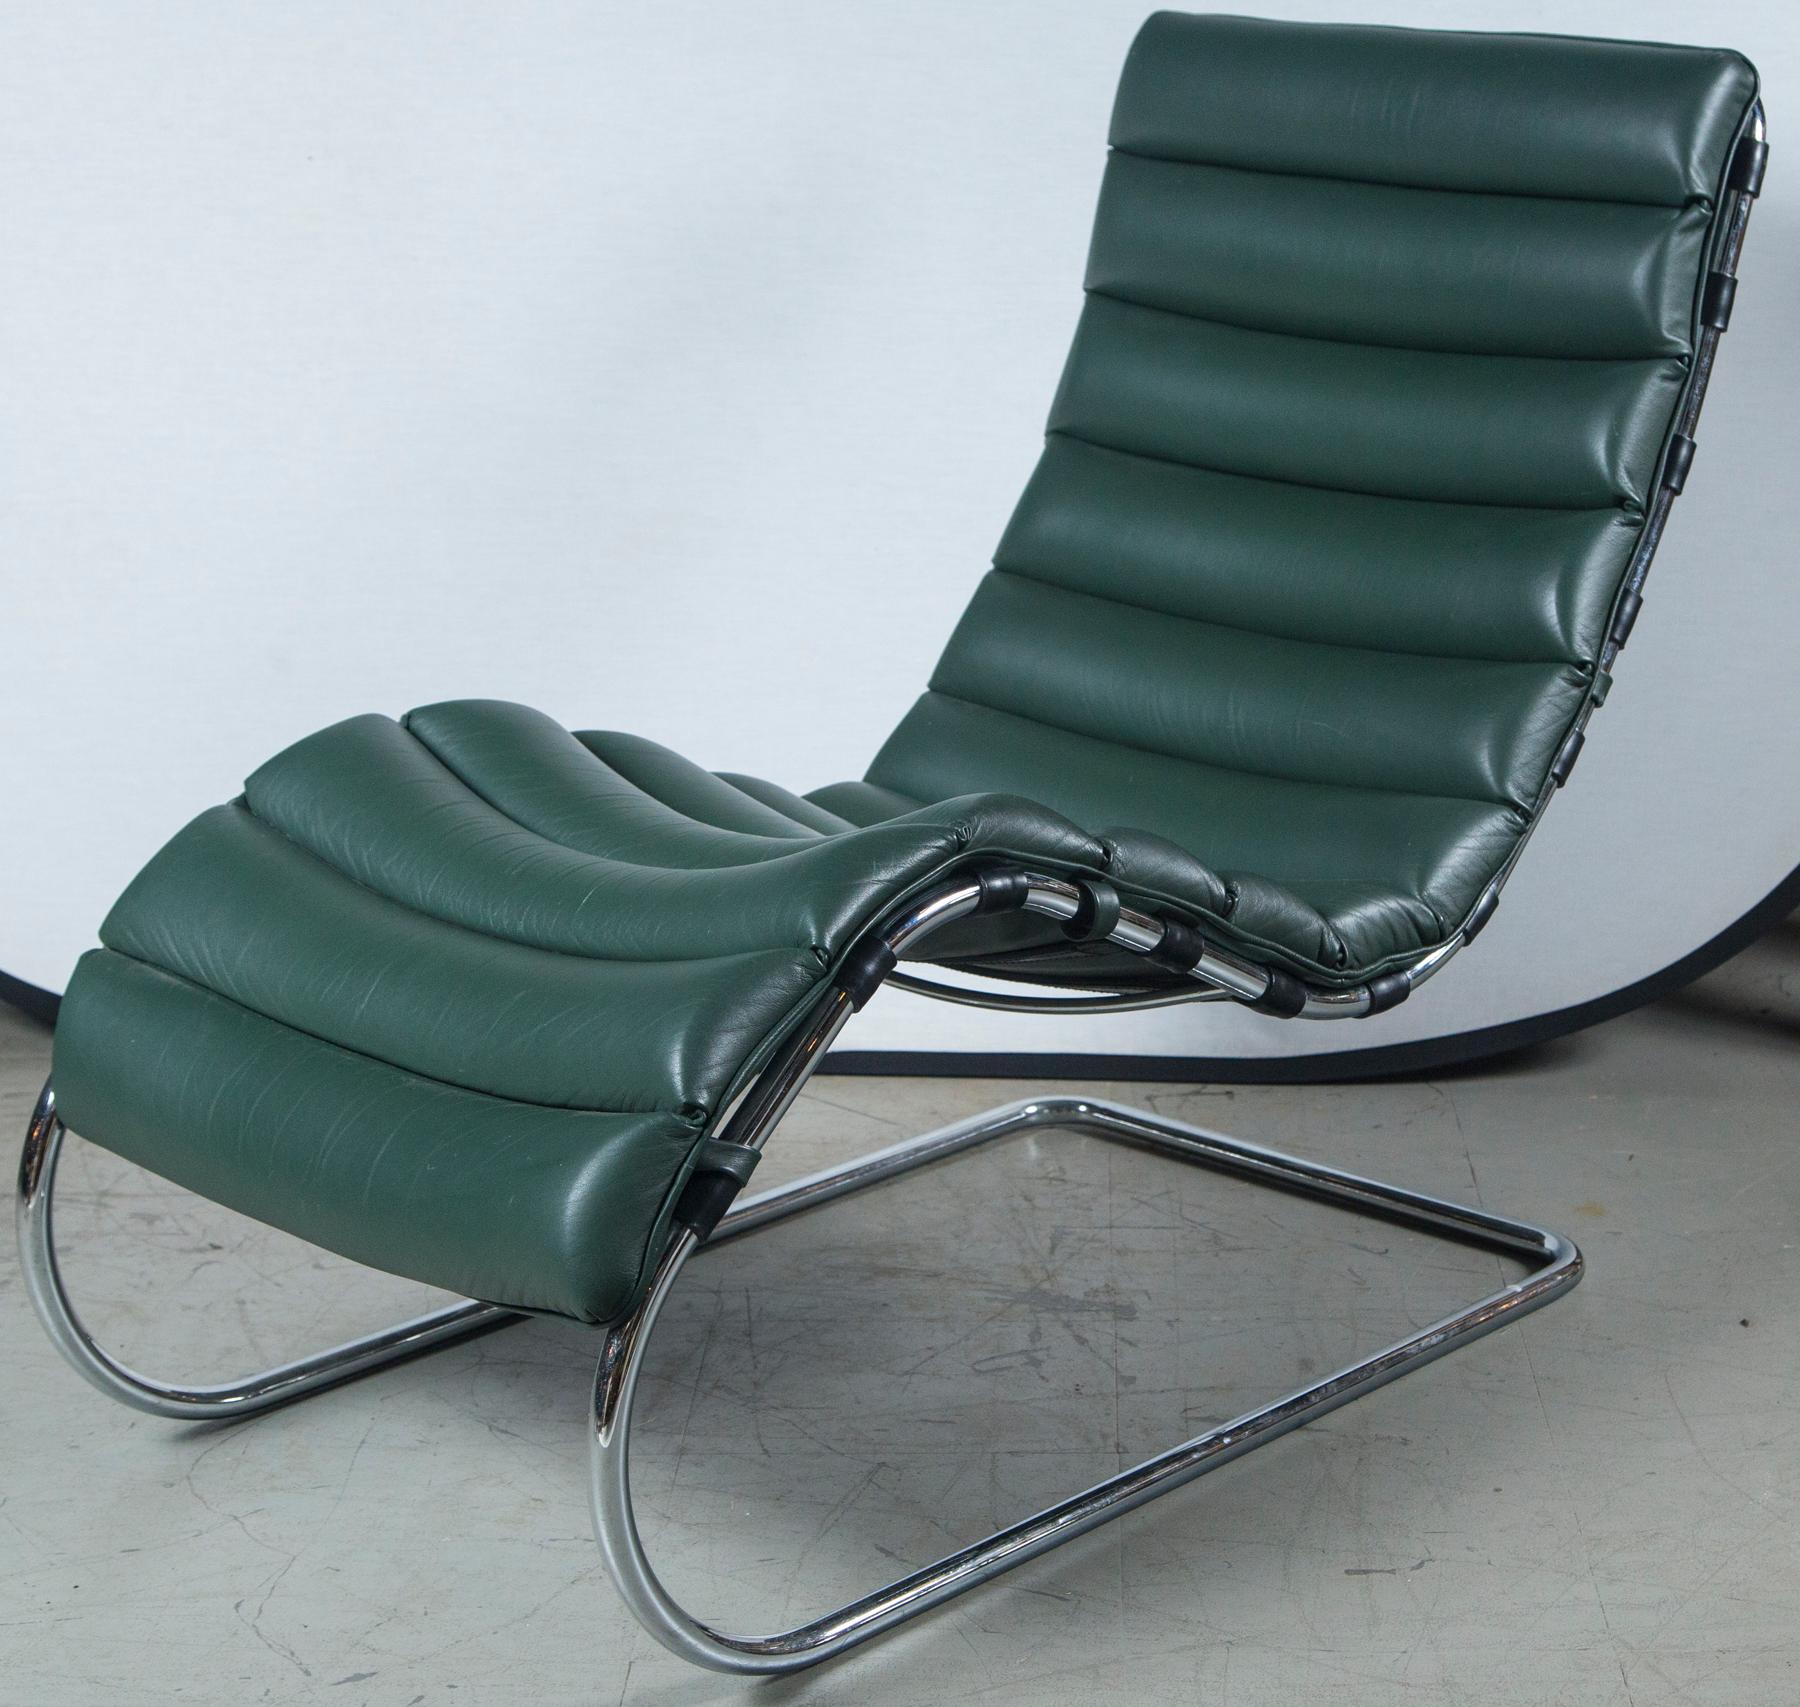 A very fine green leather with brown leather straps underneath designer lounger chair, circa 1970. Having a fastback form with deep seat area and fluid lines with firm original leather all around and a nice springy feel when sat it. A museum quality